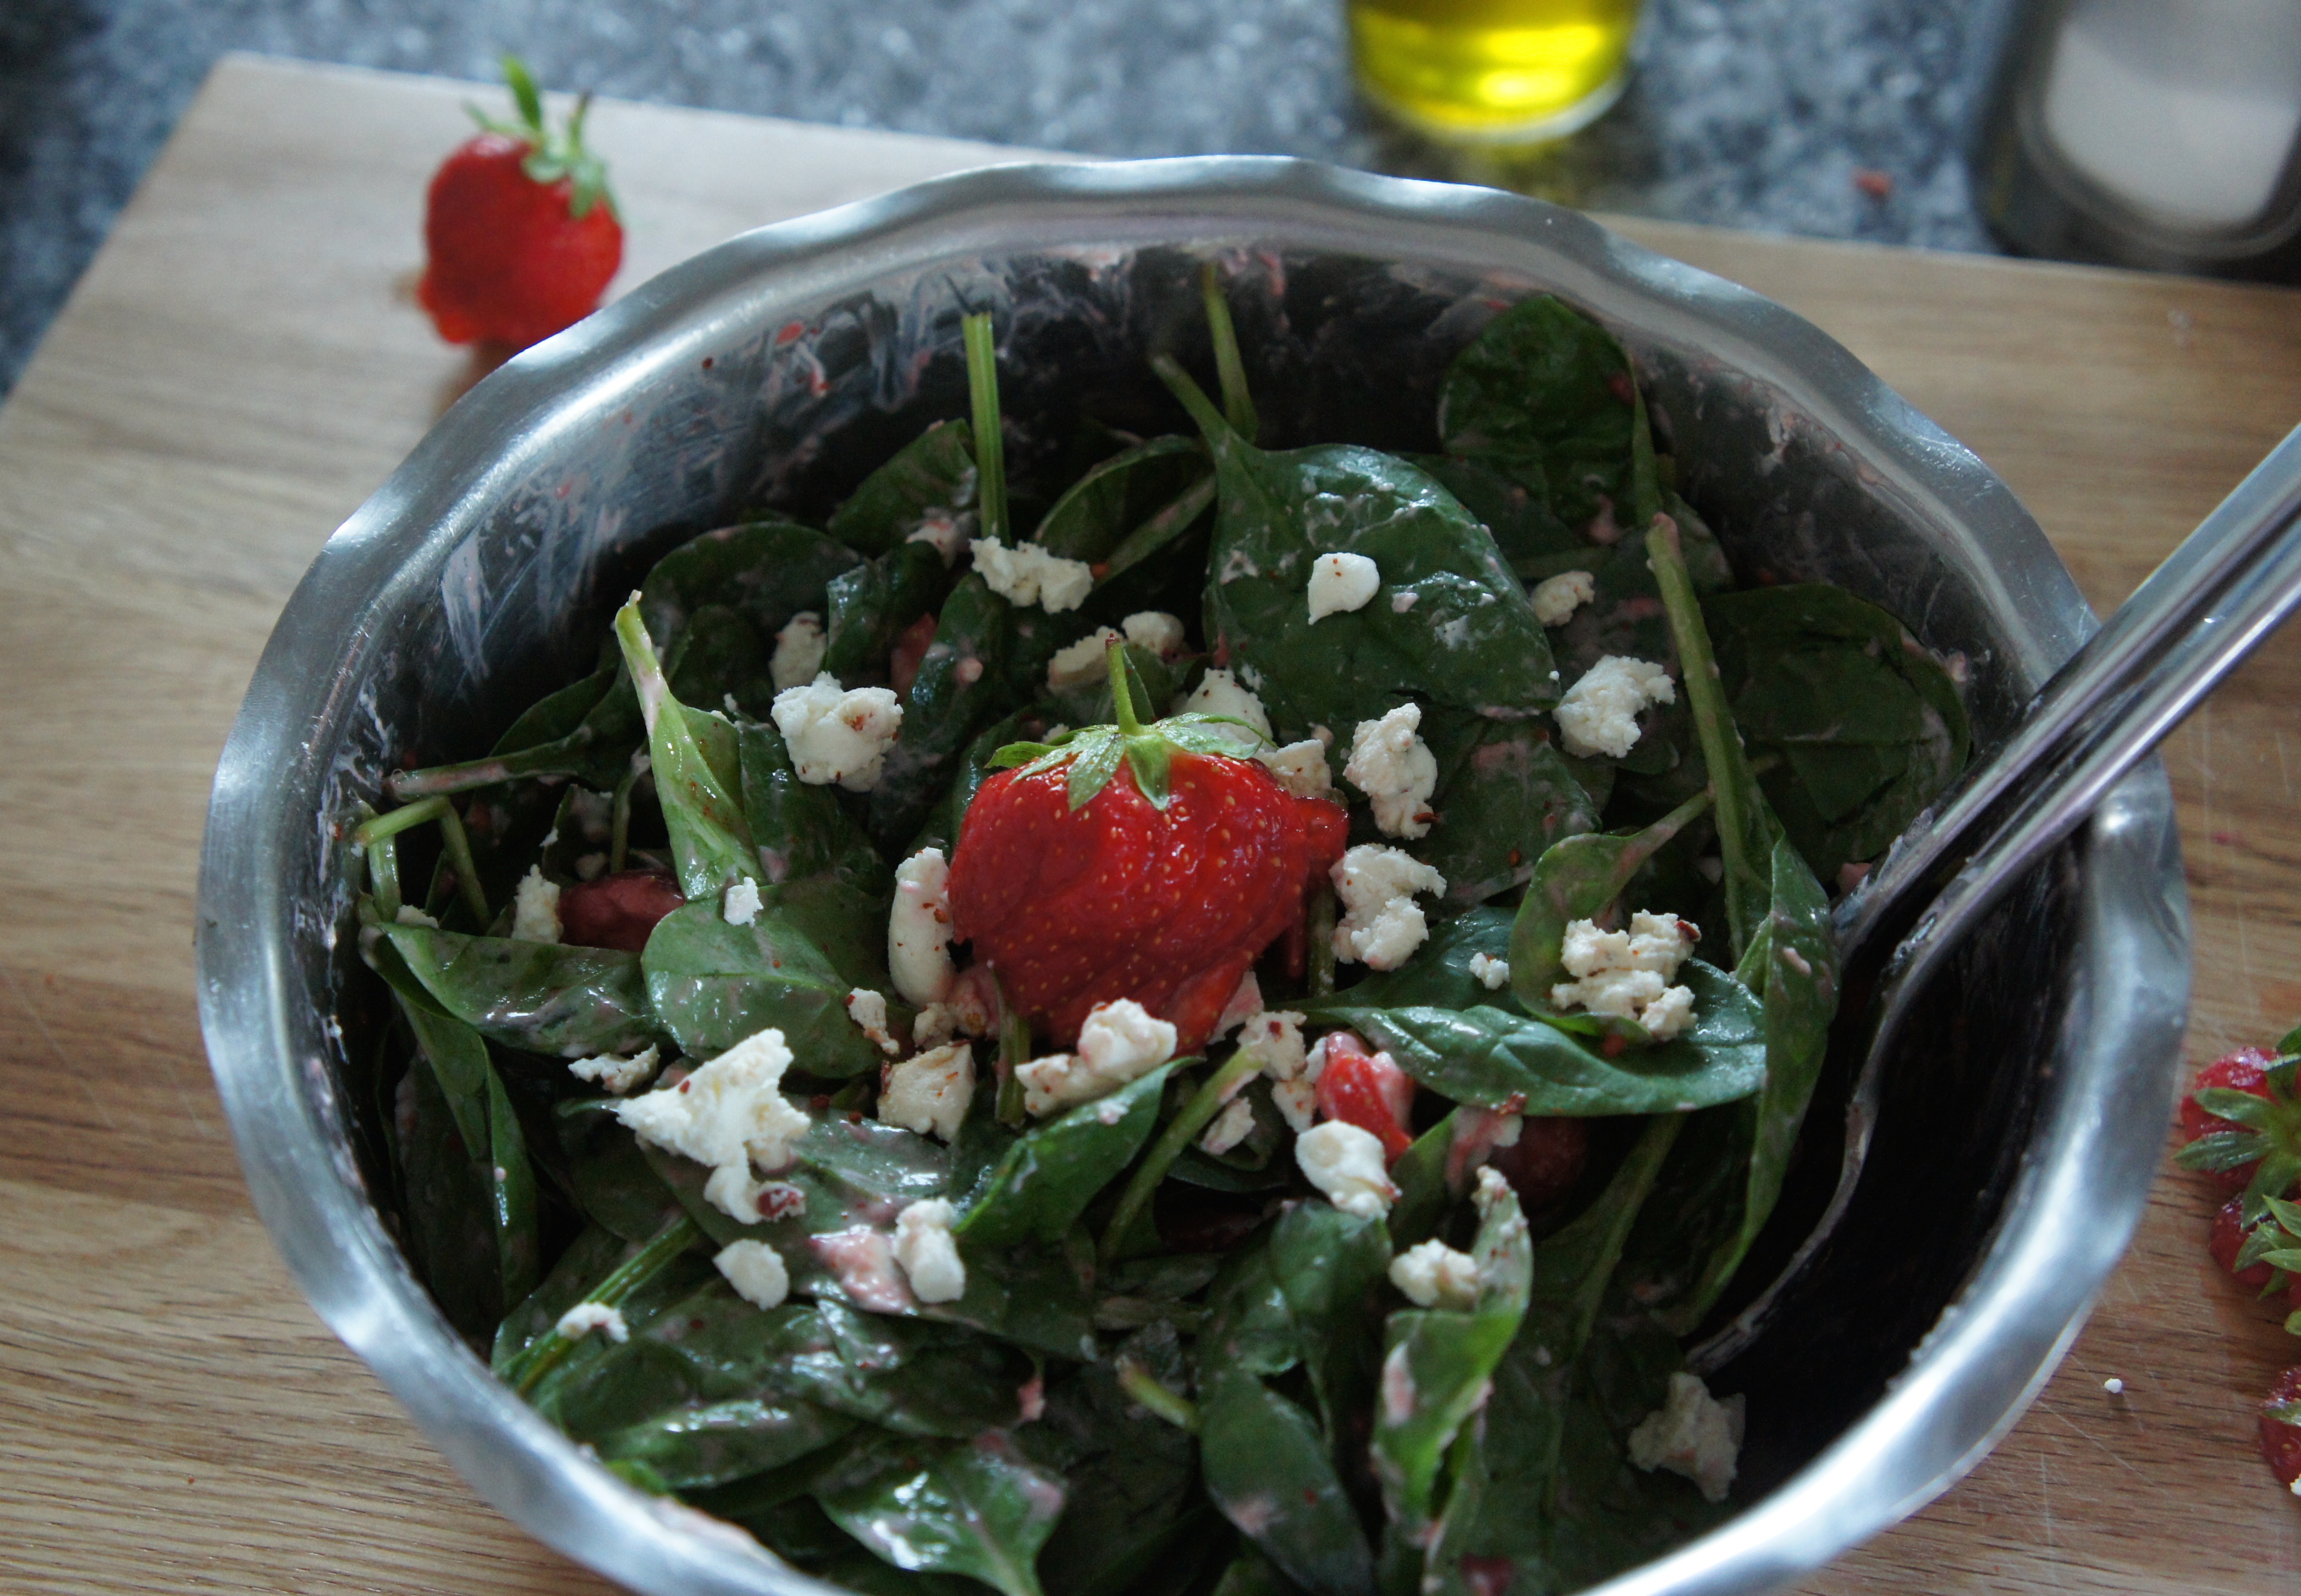 Final spinach strawberry goats cheese salad